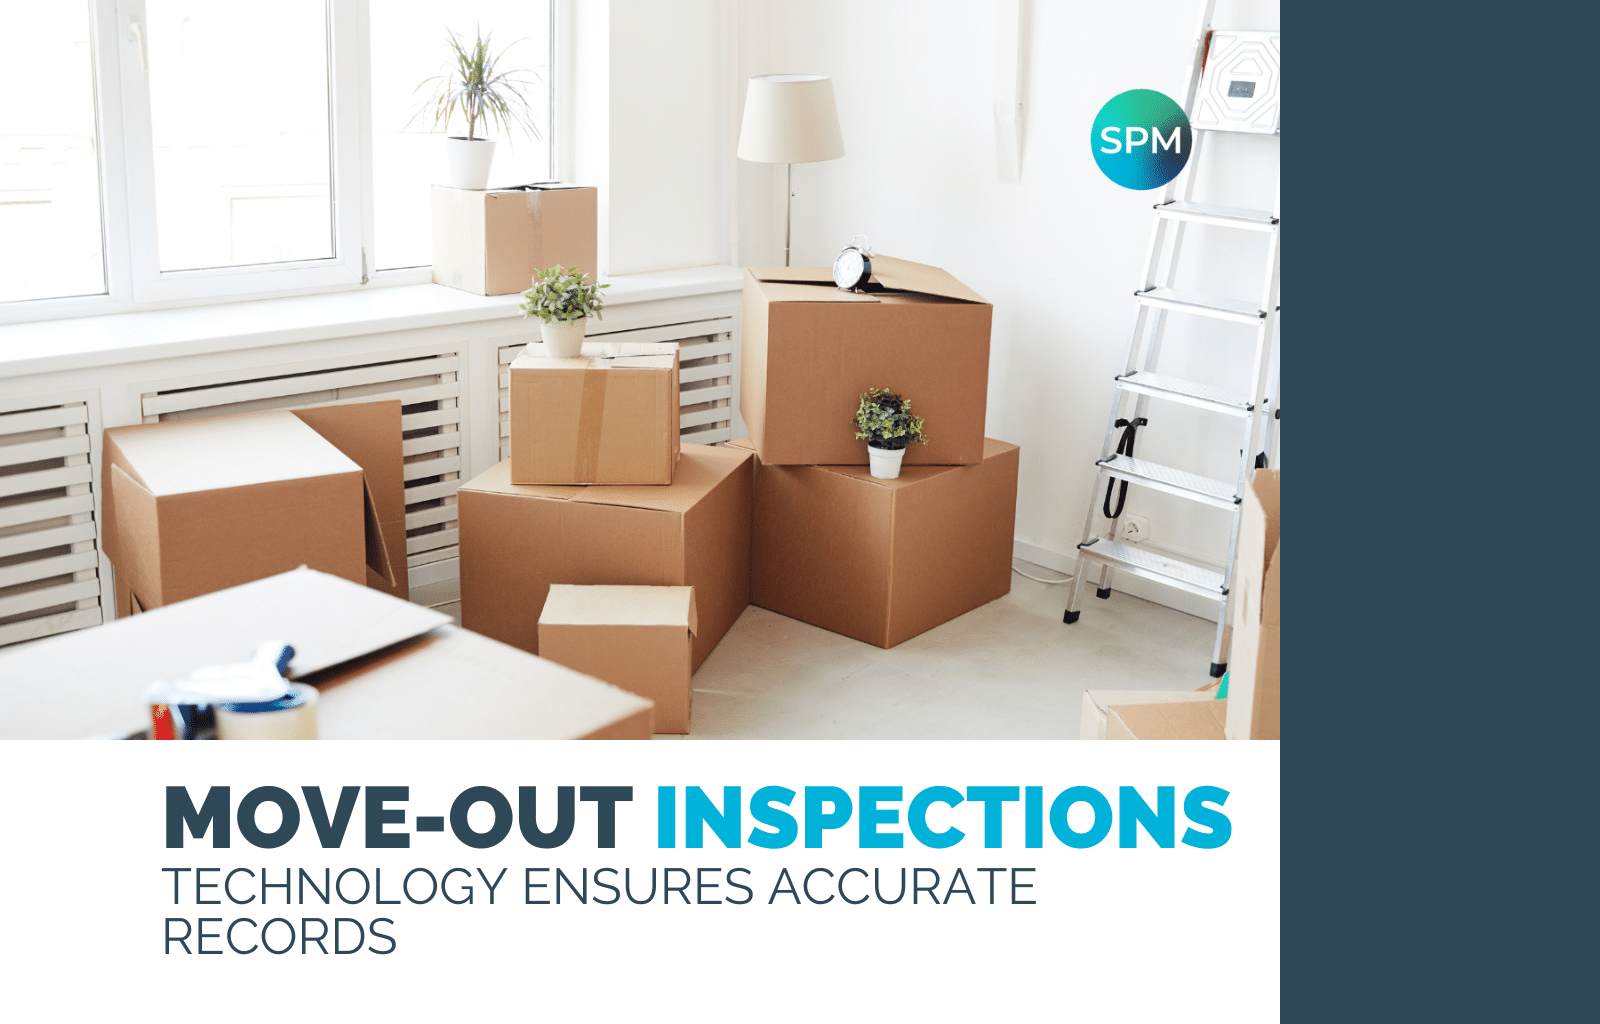 Move-out Inspections Technology Ensures Accurate Records